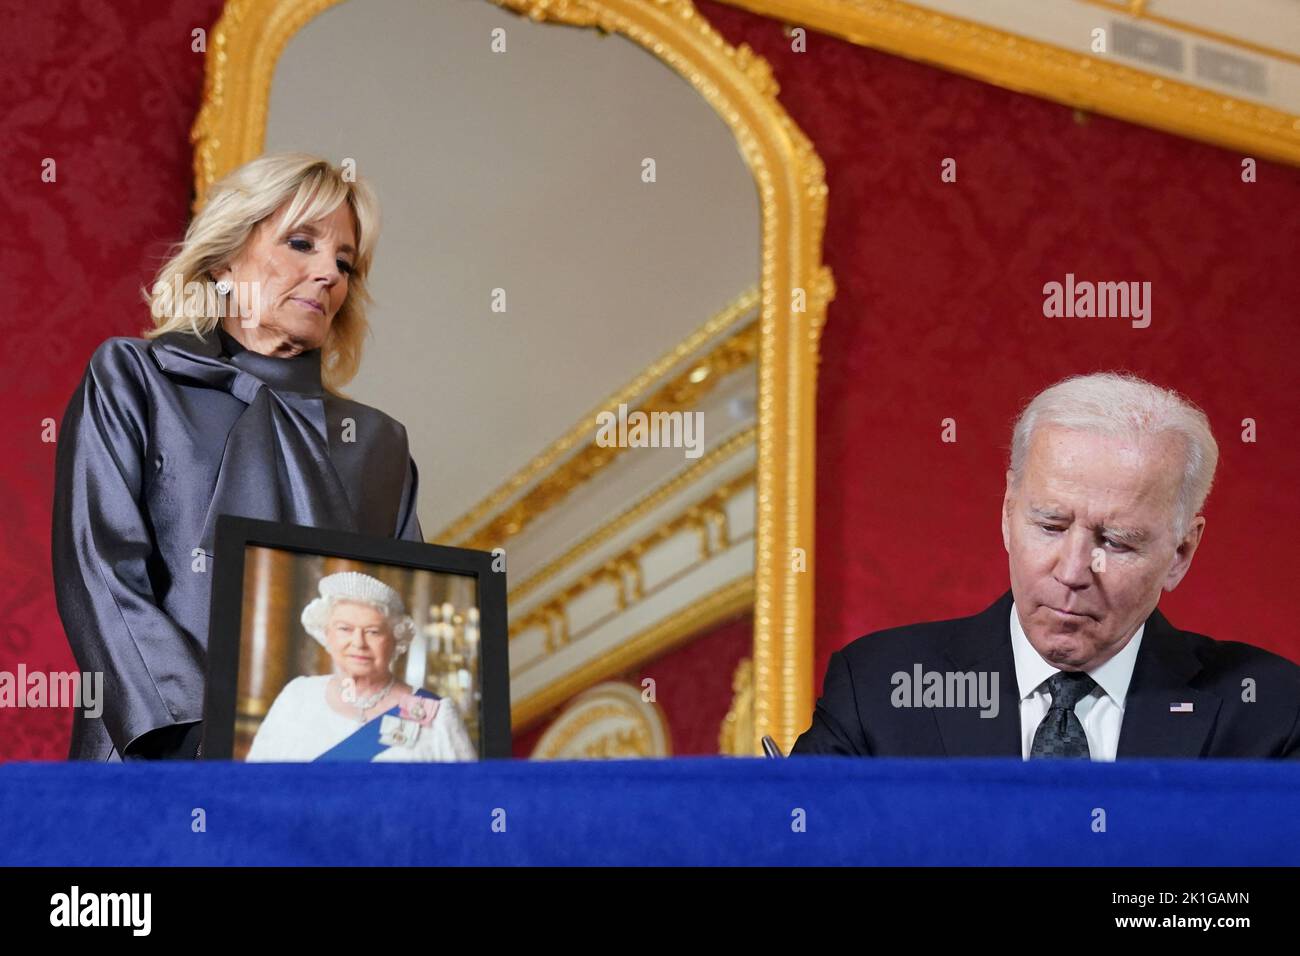 U.S. President Joe Biden signs a condolence book for Britain's Queen Elizabeth, following her death, at Lancaster House in London, Britain, September 18, 2022. REUTERS/Kevin Lamarque Stock Photo